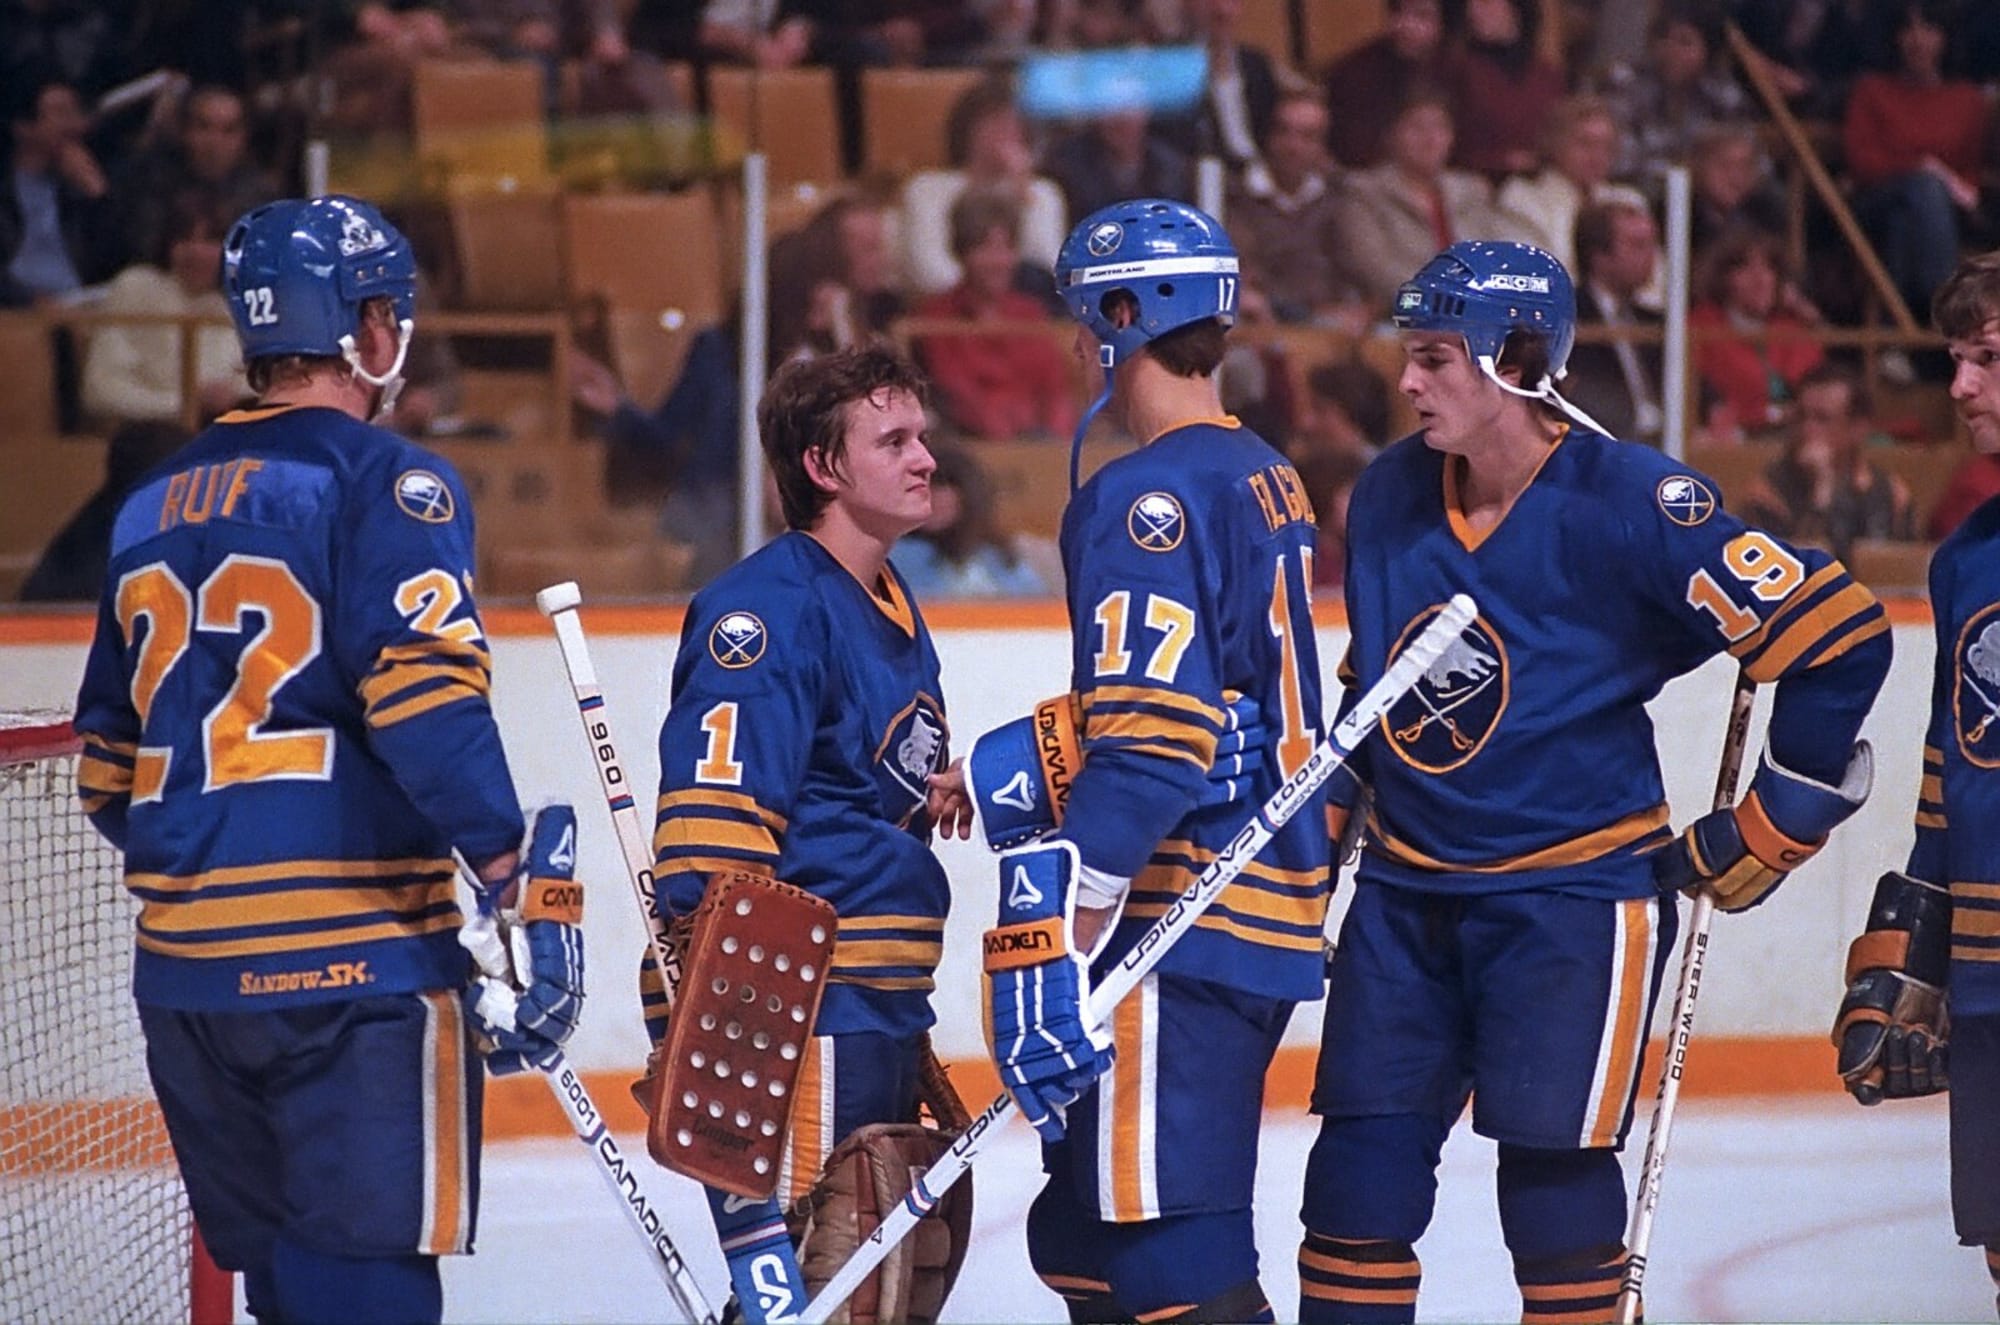 Some notable first games for Buffalo Sabres